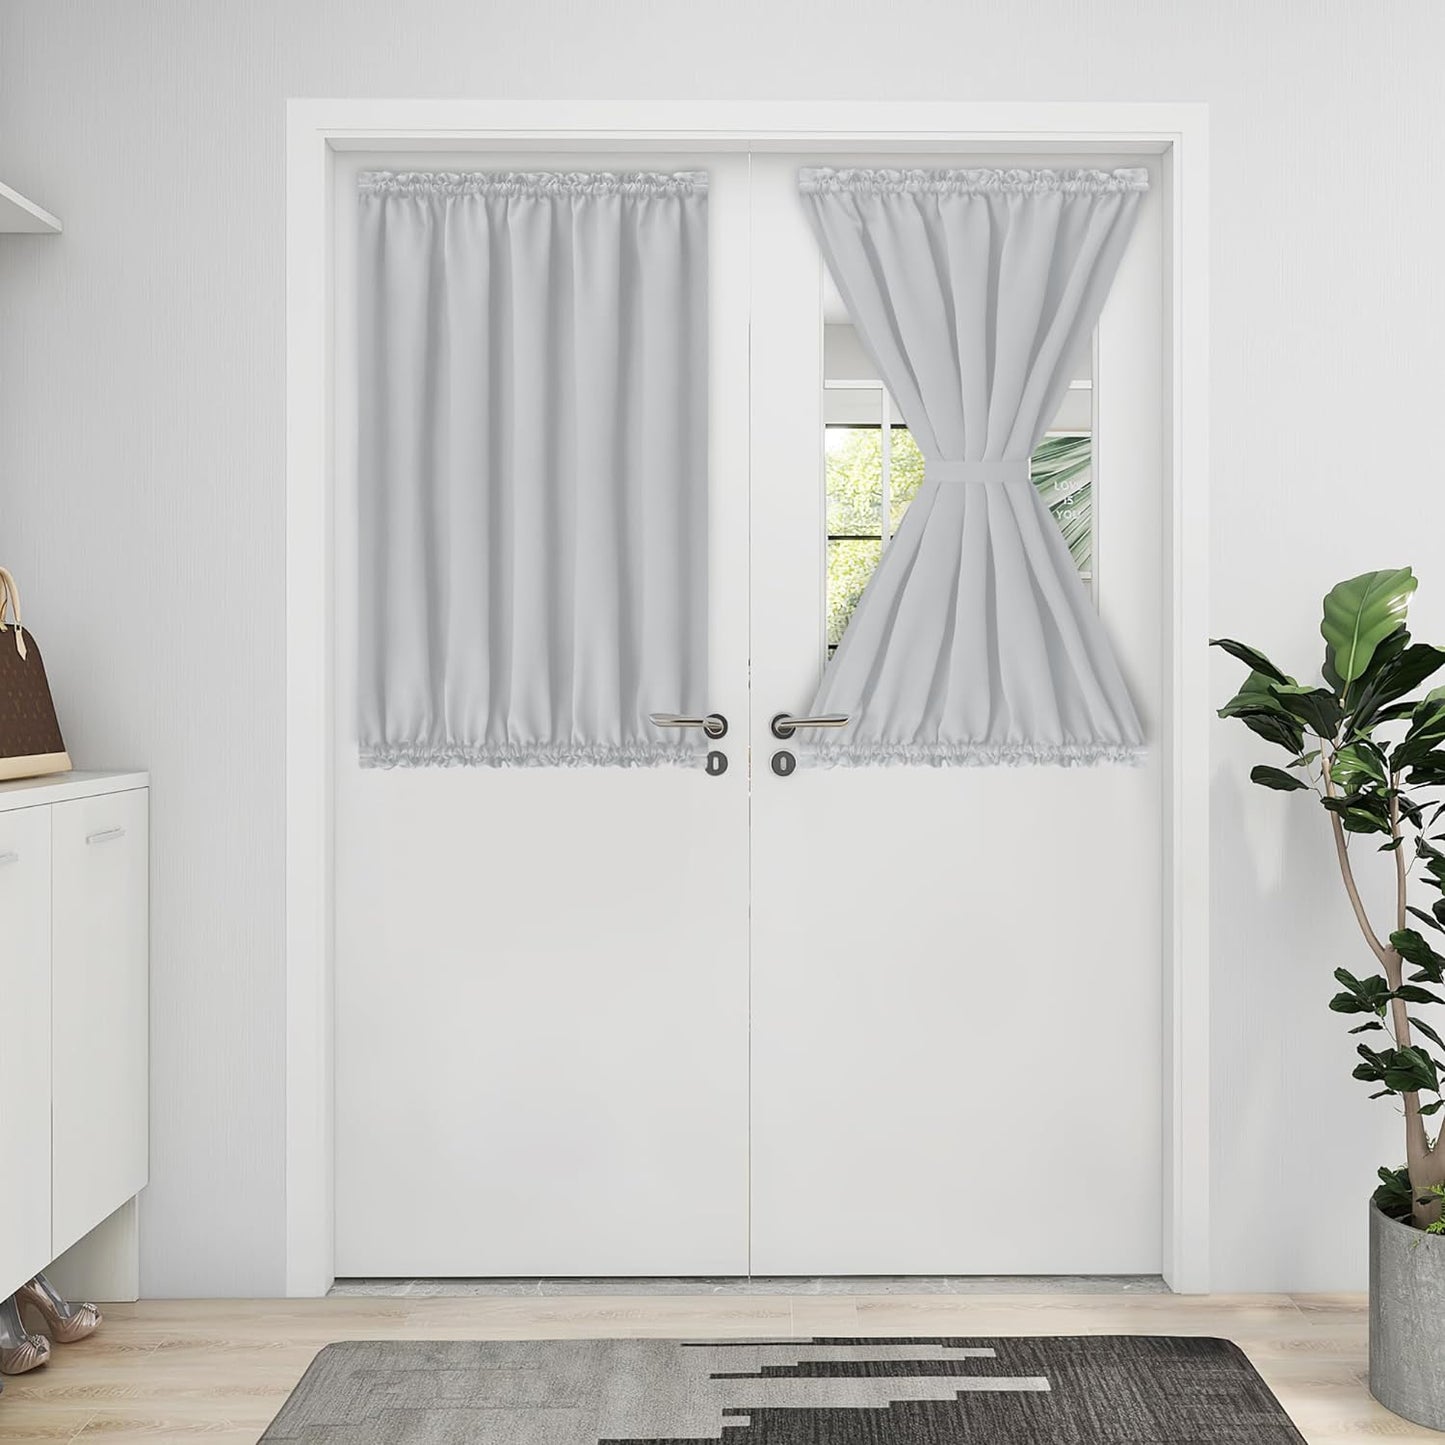 Easy-Going Blackout Door Curtains, Rod Pocket Privacy Light Filtering Sidelight Curtains French Door Curtains with Tieback, 1 Panel, 25X40 Inch, Gray  Easy-Going Greyish White W25 X L40 Inch 